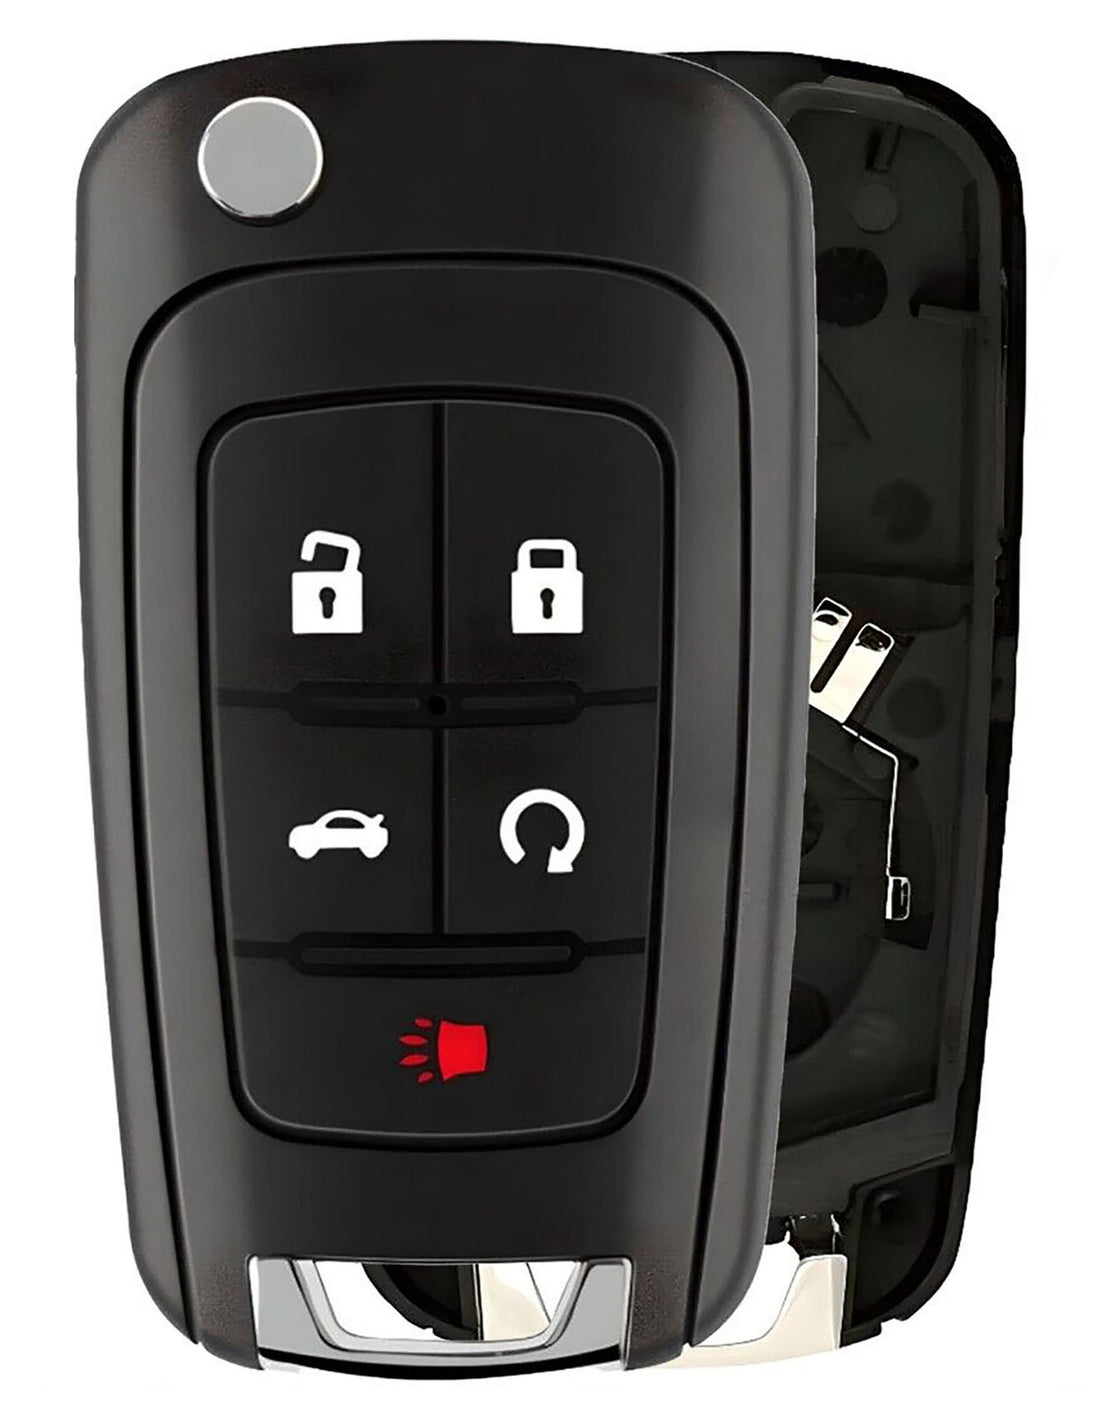 1x New Quality Replacement Key Fob Remote SHELL / CASE Compatible with & Fit For Buick & Chevrolet - MPN KR55WK50073-04 (NO electronics or Chip inside)